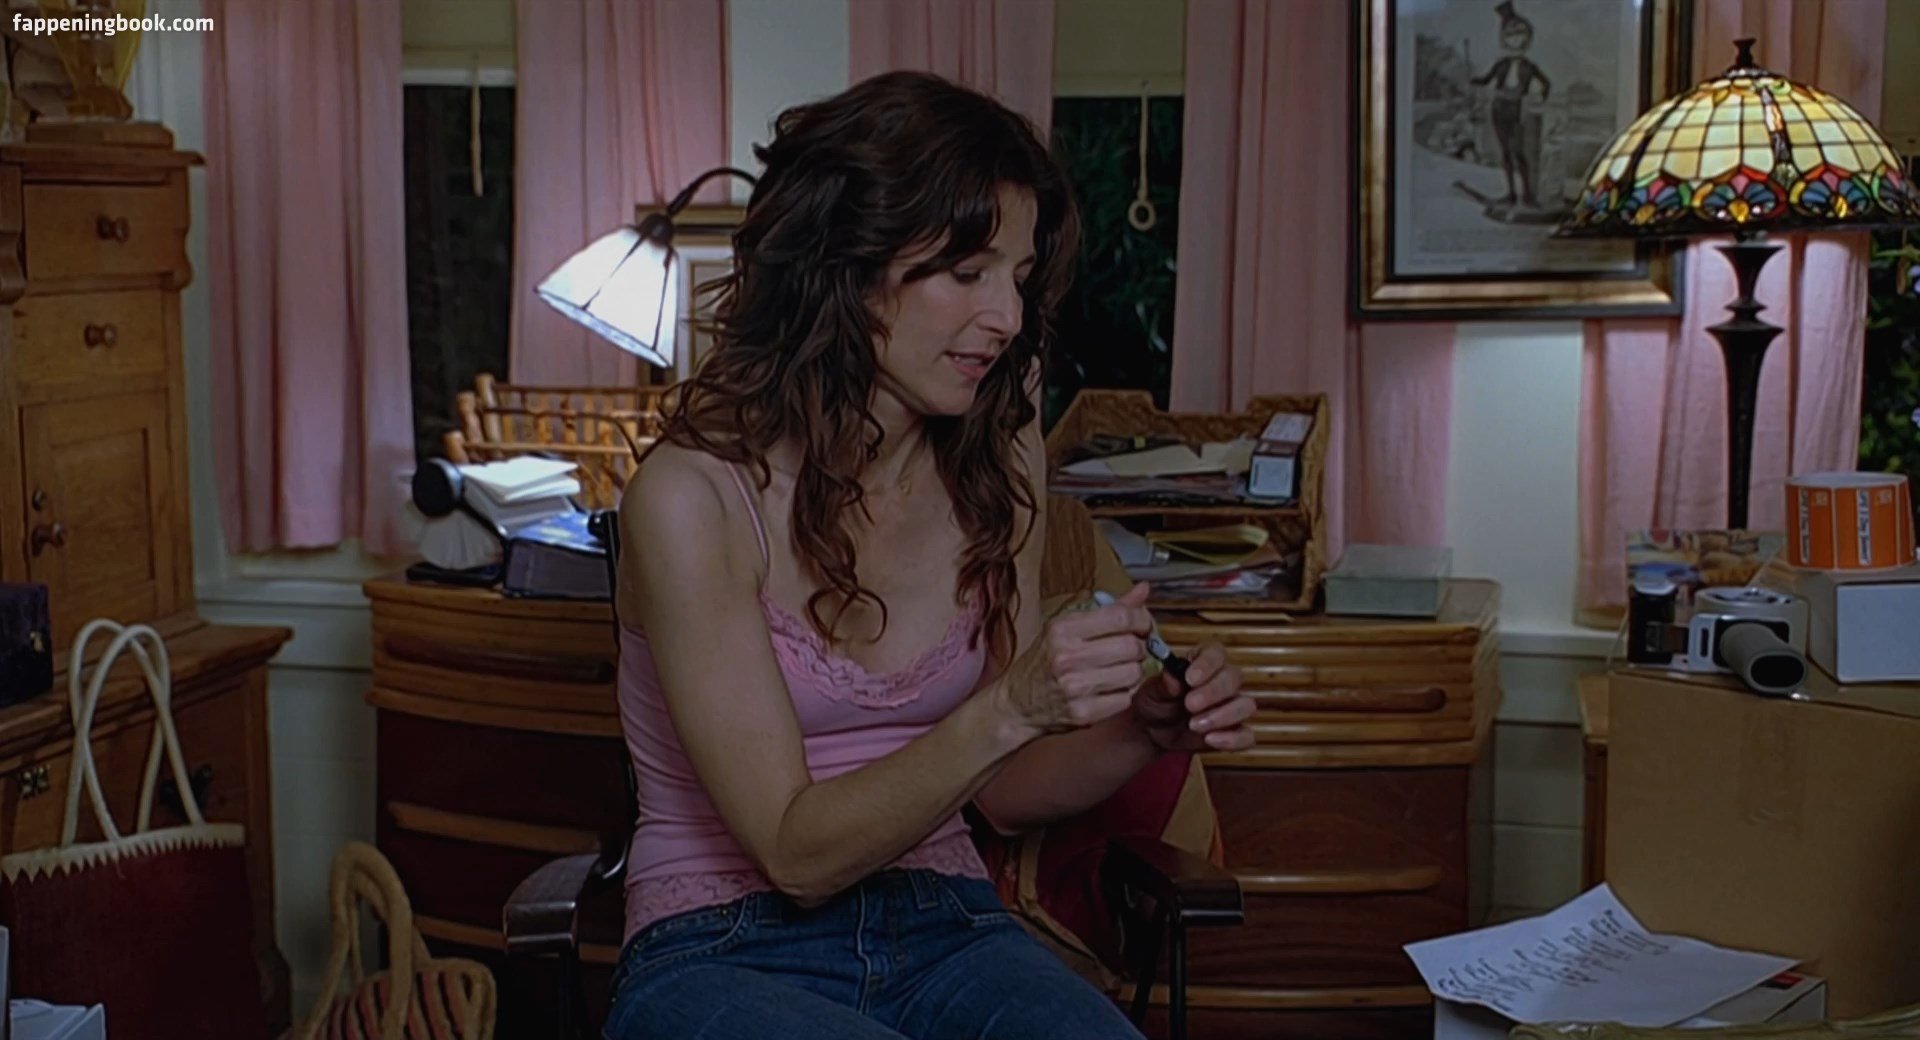 Catherine Keener Nude, The Fappening - Photo #105652 - FappeningBook.